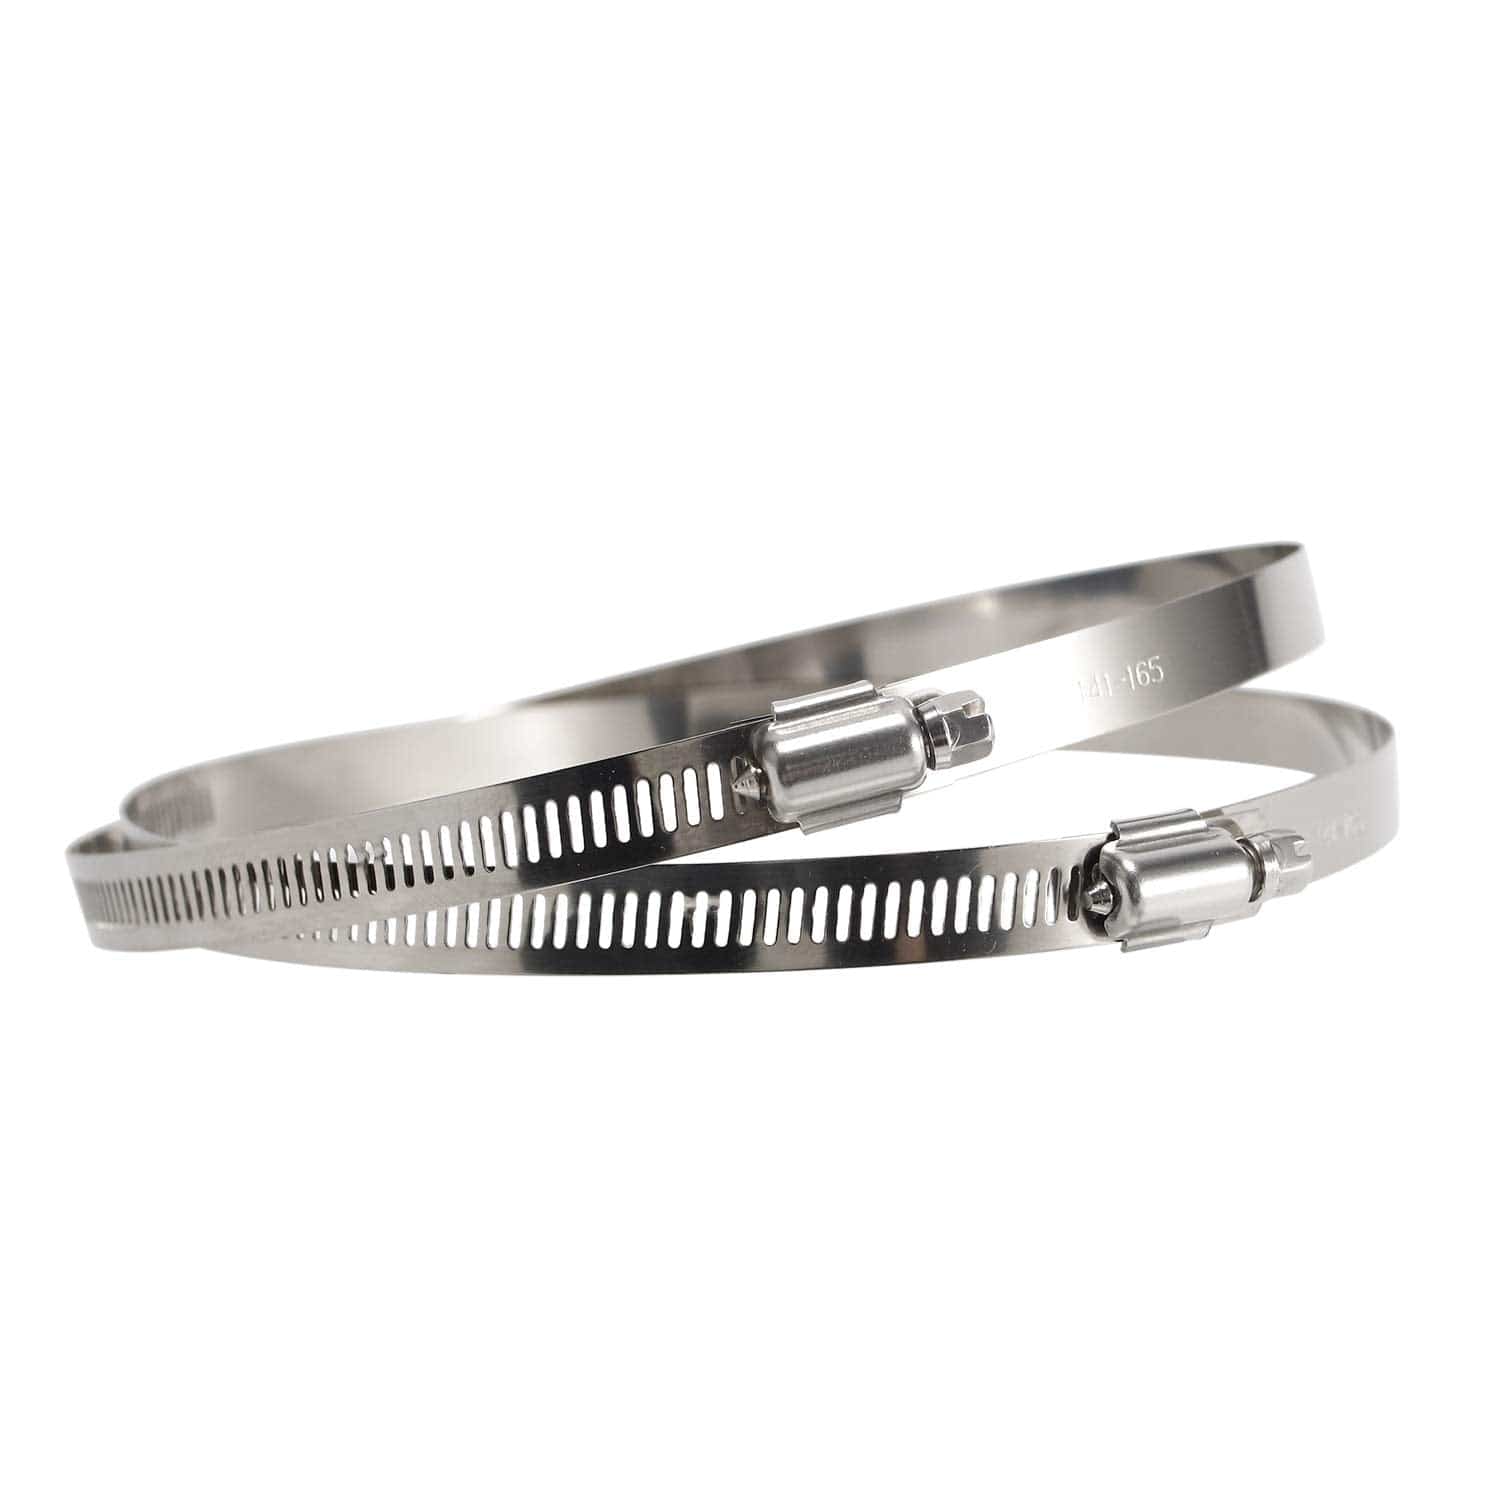 1 Pair Stainless Steel Duct Clamps with Adjustable Worm Drive